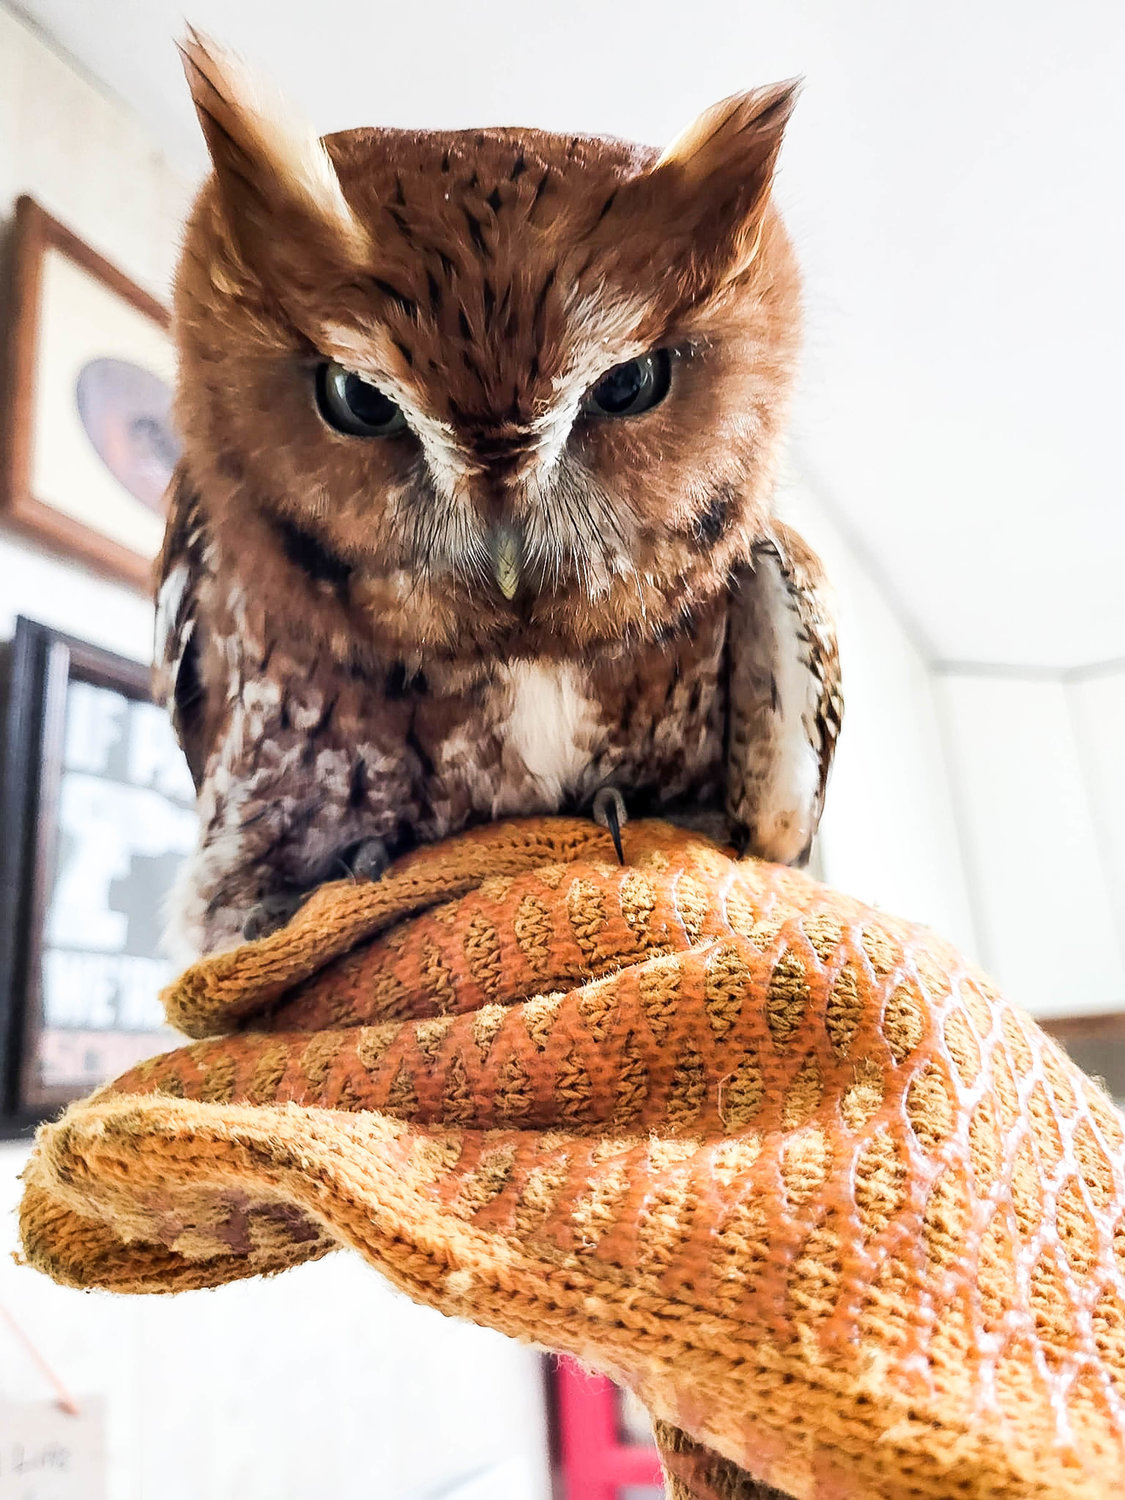 RESCUED OWL — This red phase screech owl was rescued off the side of a road in Whitesboro on Tuesday by a passing Oneida County Sheriff's deputy, according to the Woodhaven Wildlife Center. Officials said the owl is believed to have an injured wing, and possibly a head injury. He was taken to the Cornell Wildlife Hospital. Screech owls can be red, like this one, or gray, according to the state Department of Environmental Conservation — with about a third of individual birds in the species being red. Screech owls are nocturnal and have a varied diet, eating just about everything from songbirds to mice to frogs and fish.